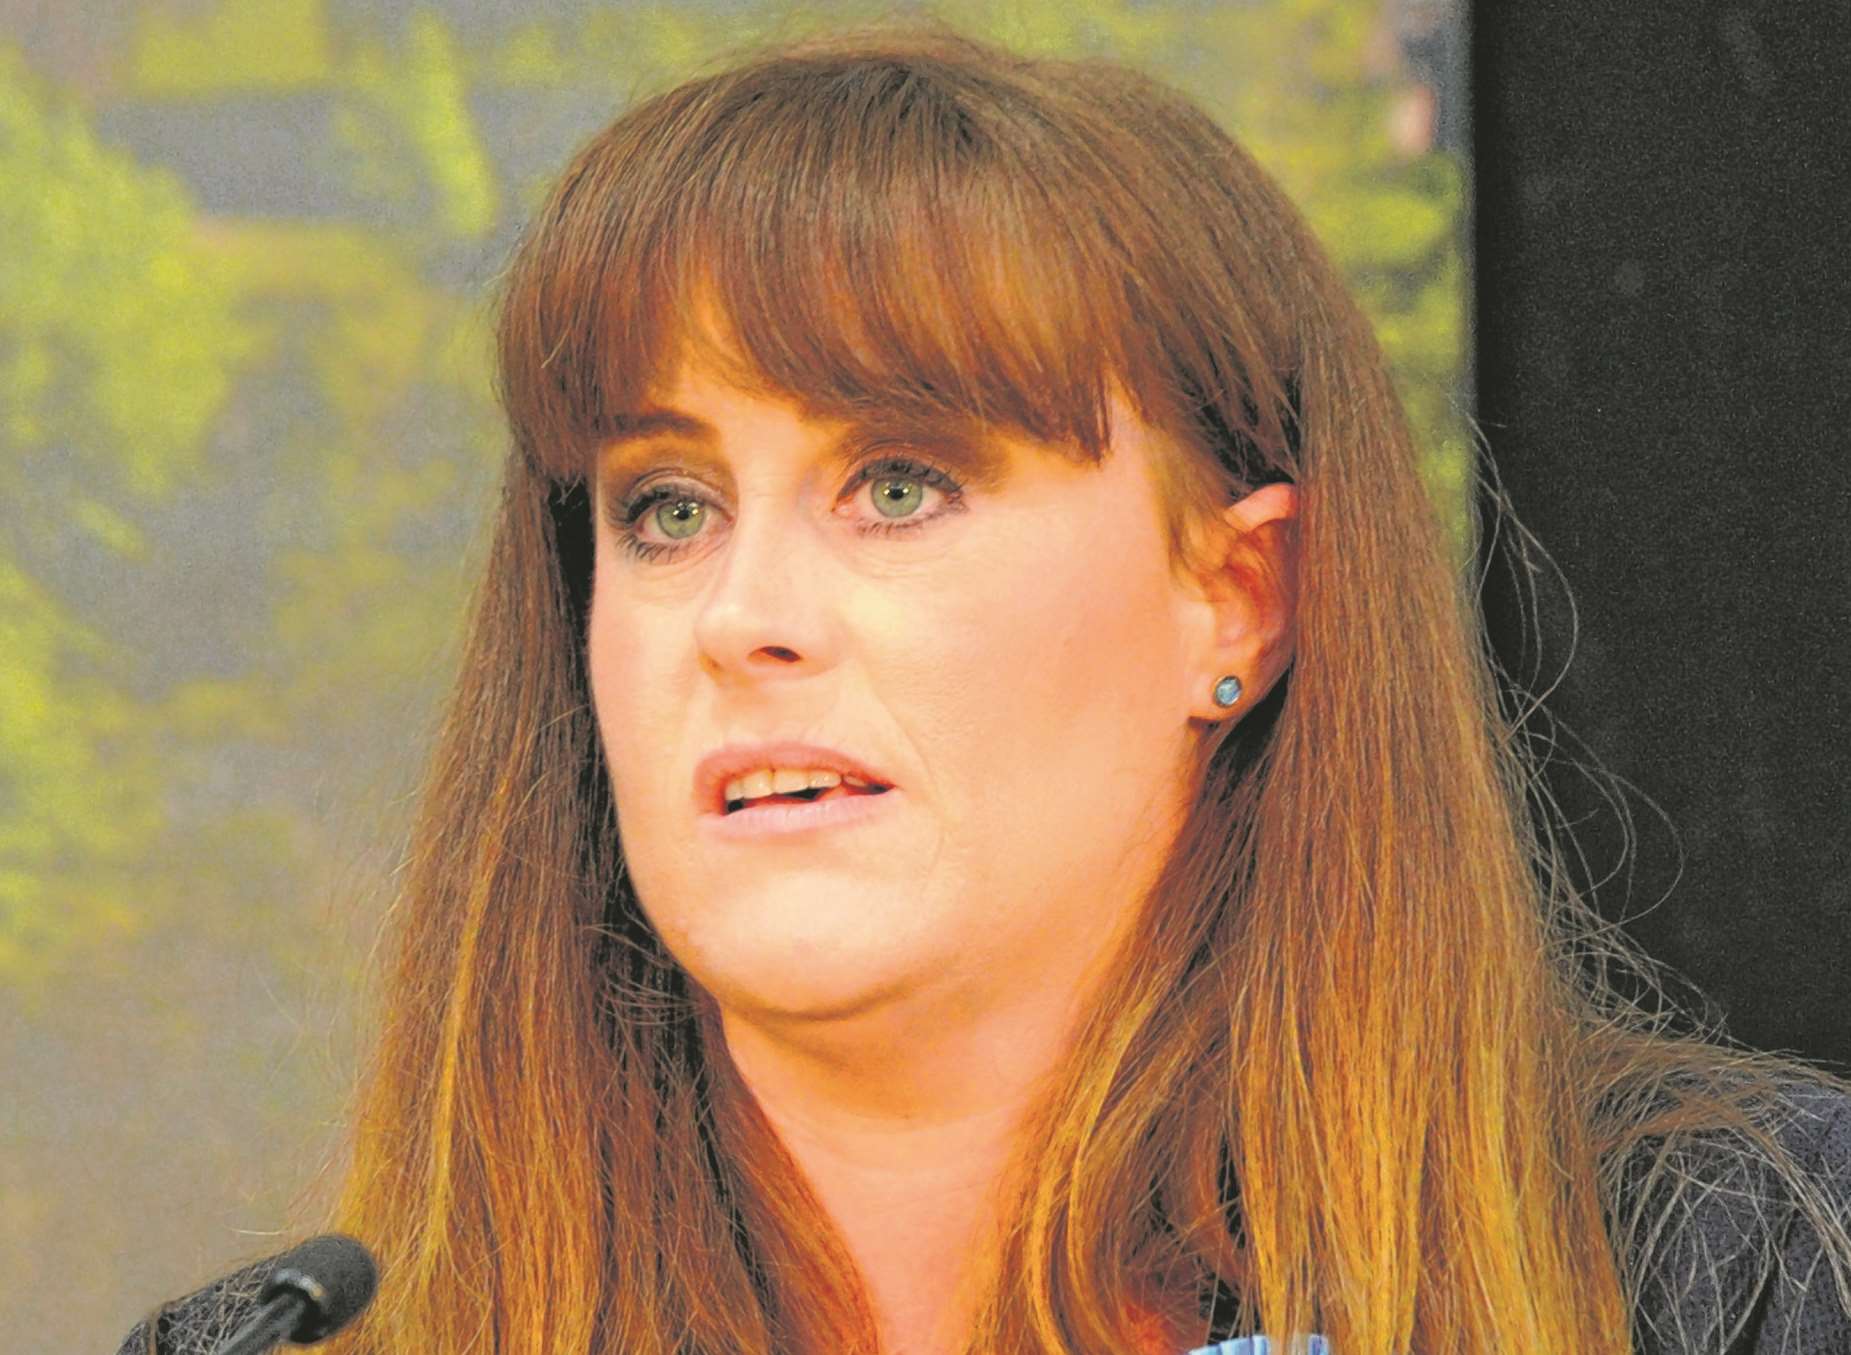 Rochester and Strood MP Kelly Tolhurst